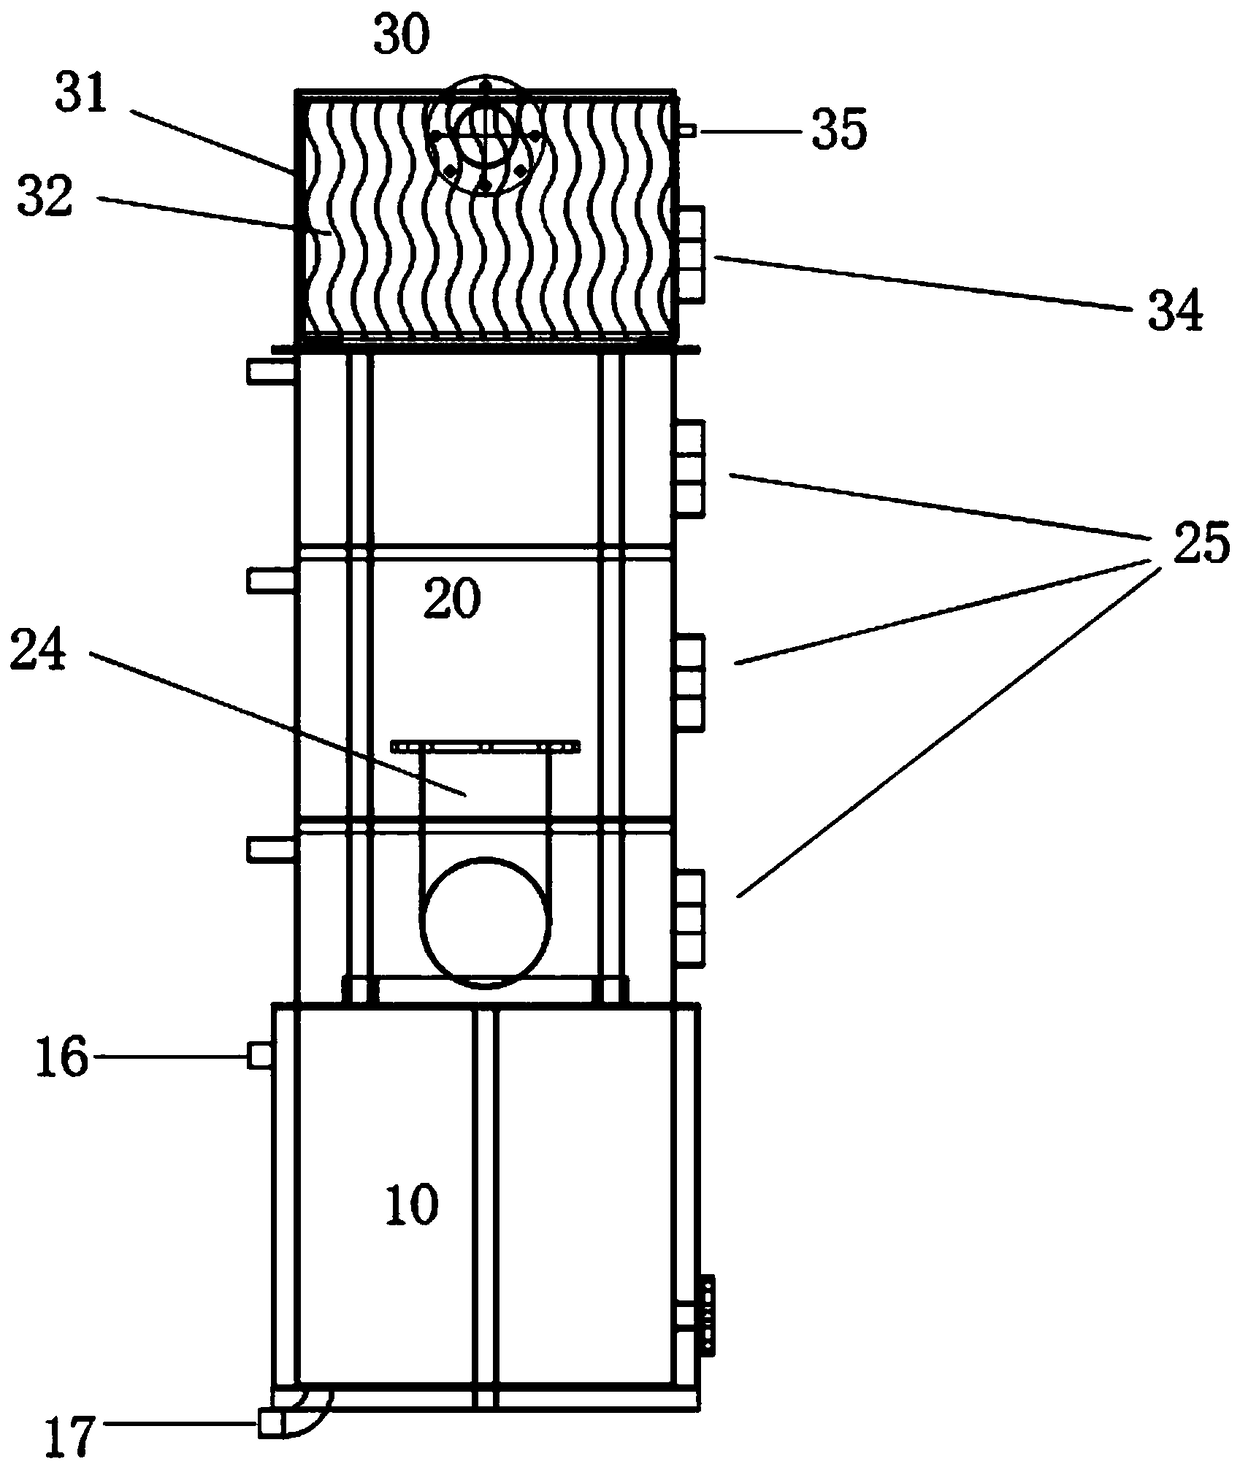 Tail gas treatment device based on small-scale incinerator and carbide finance and treatment process